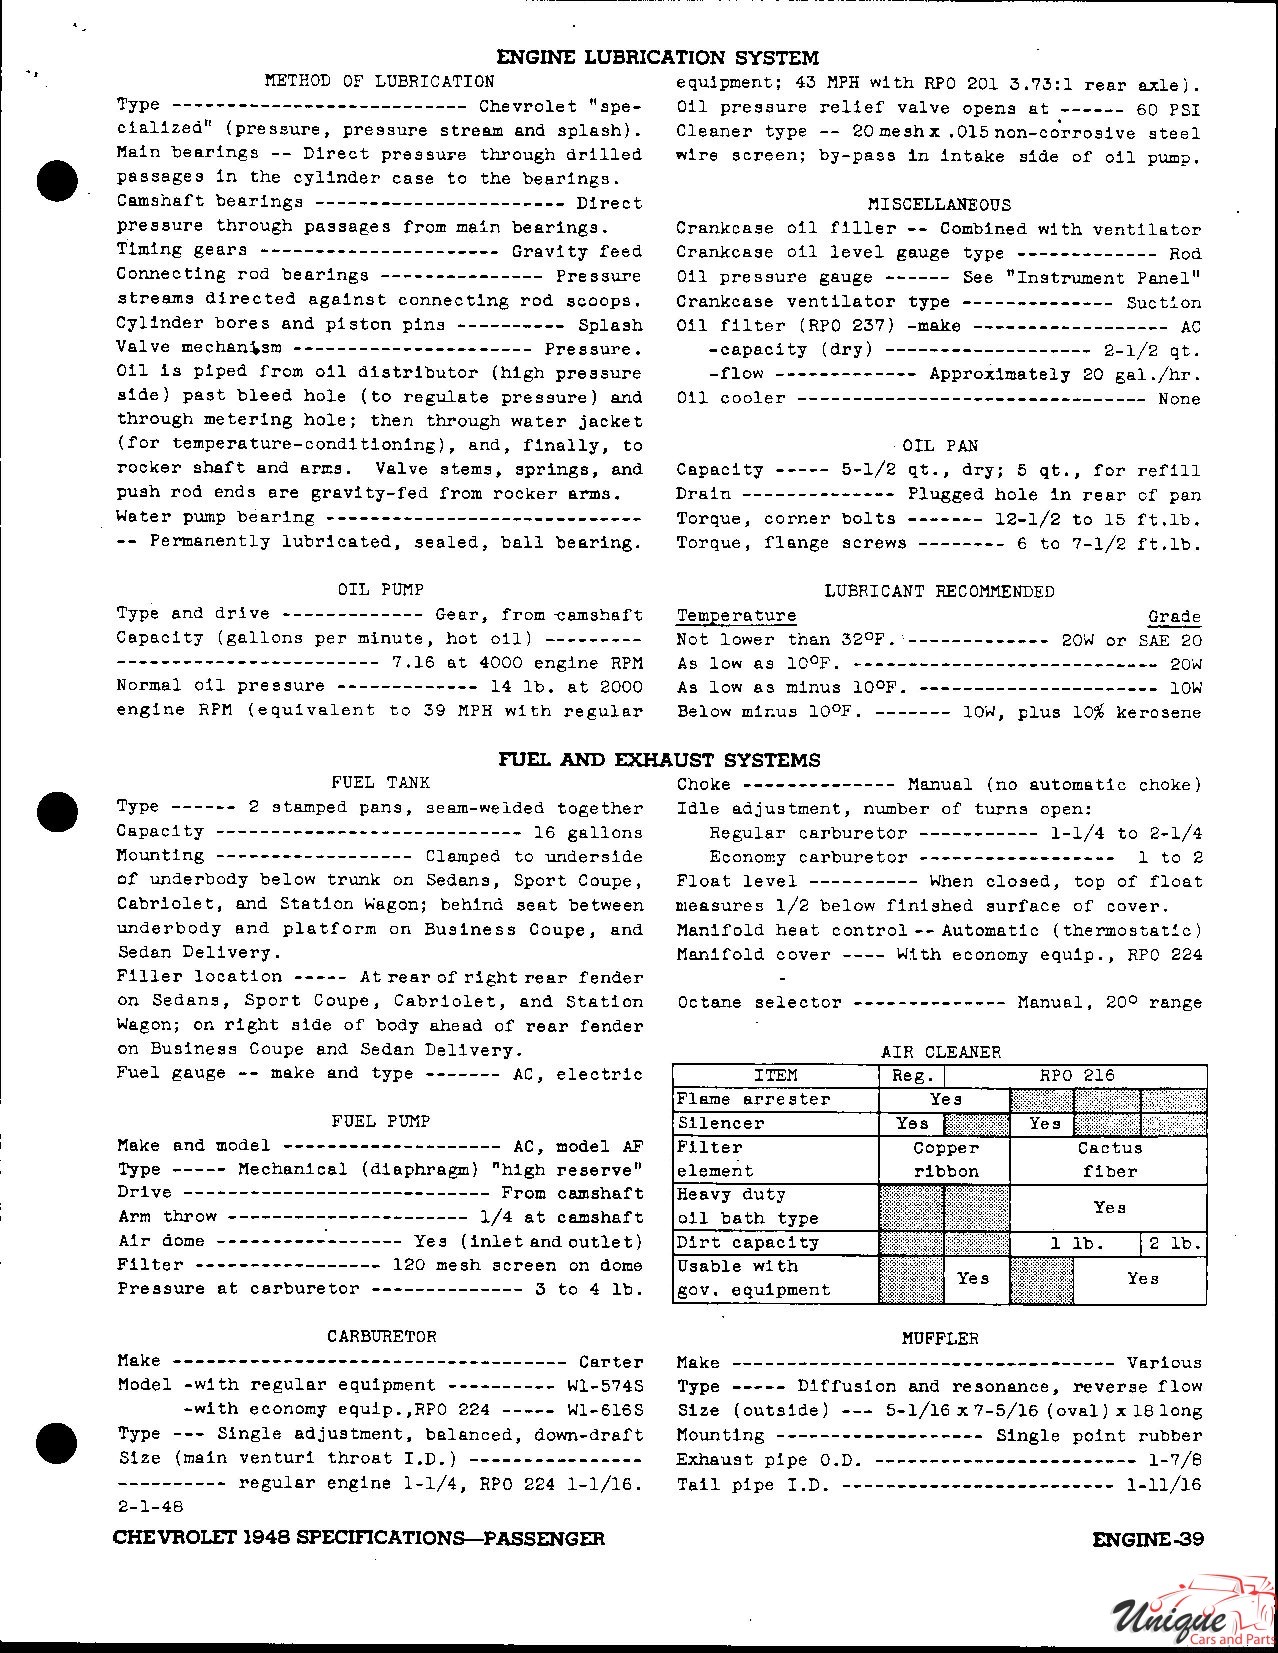 1948 Chevrolet Specifications Page 6